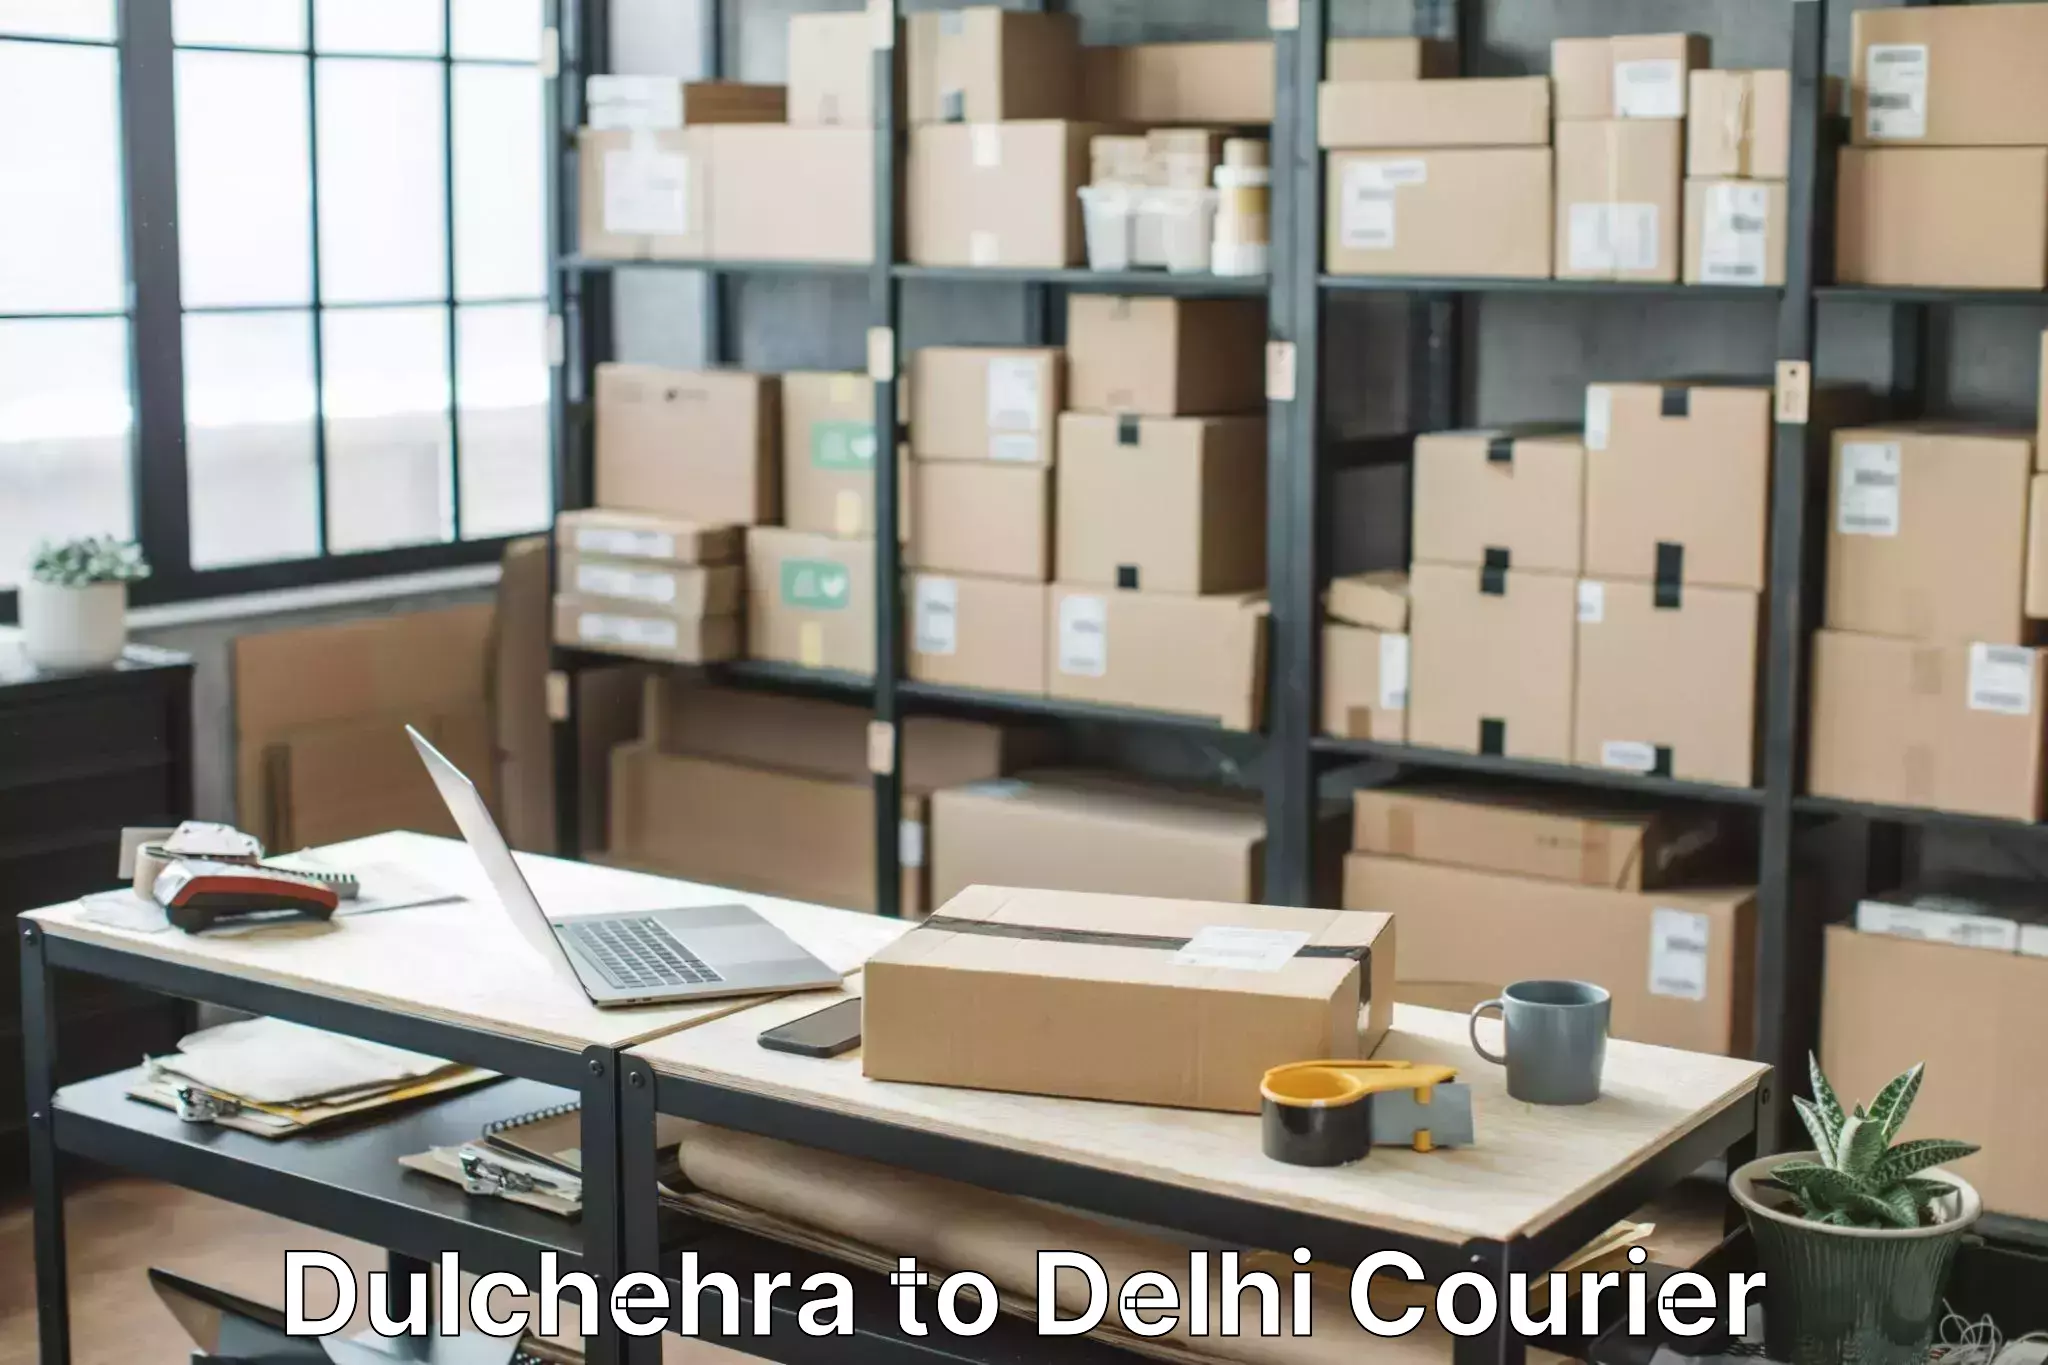 Stress-free household moving in Dulchehra to Delhi